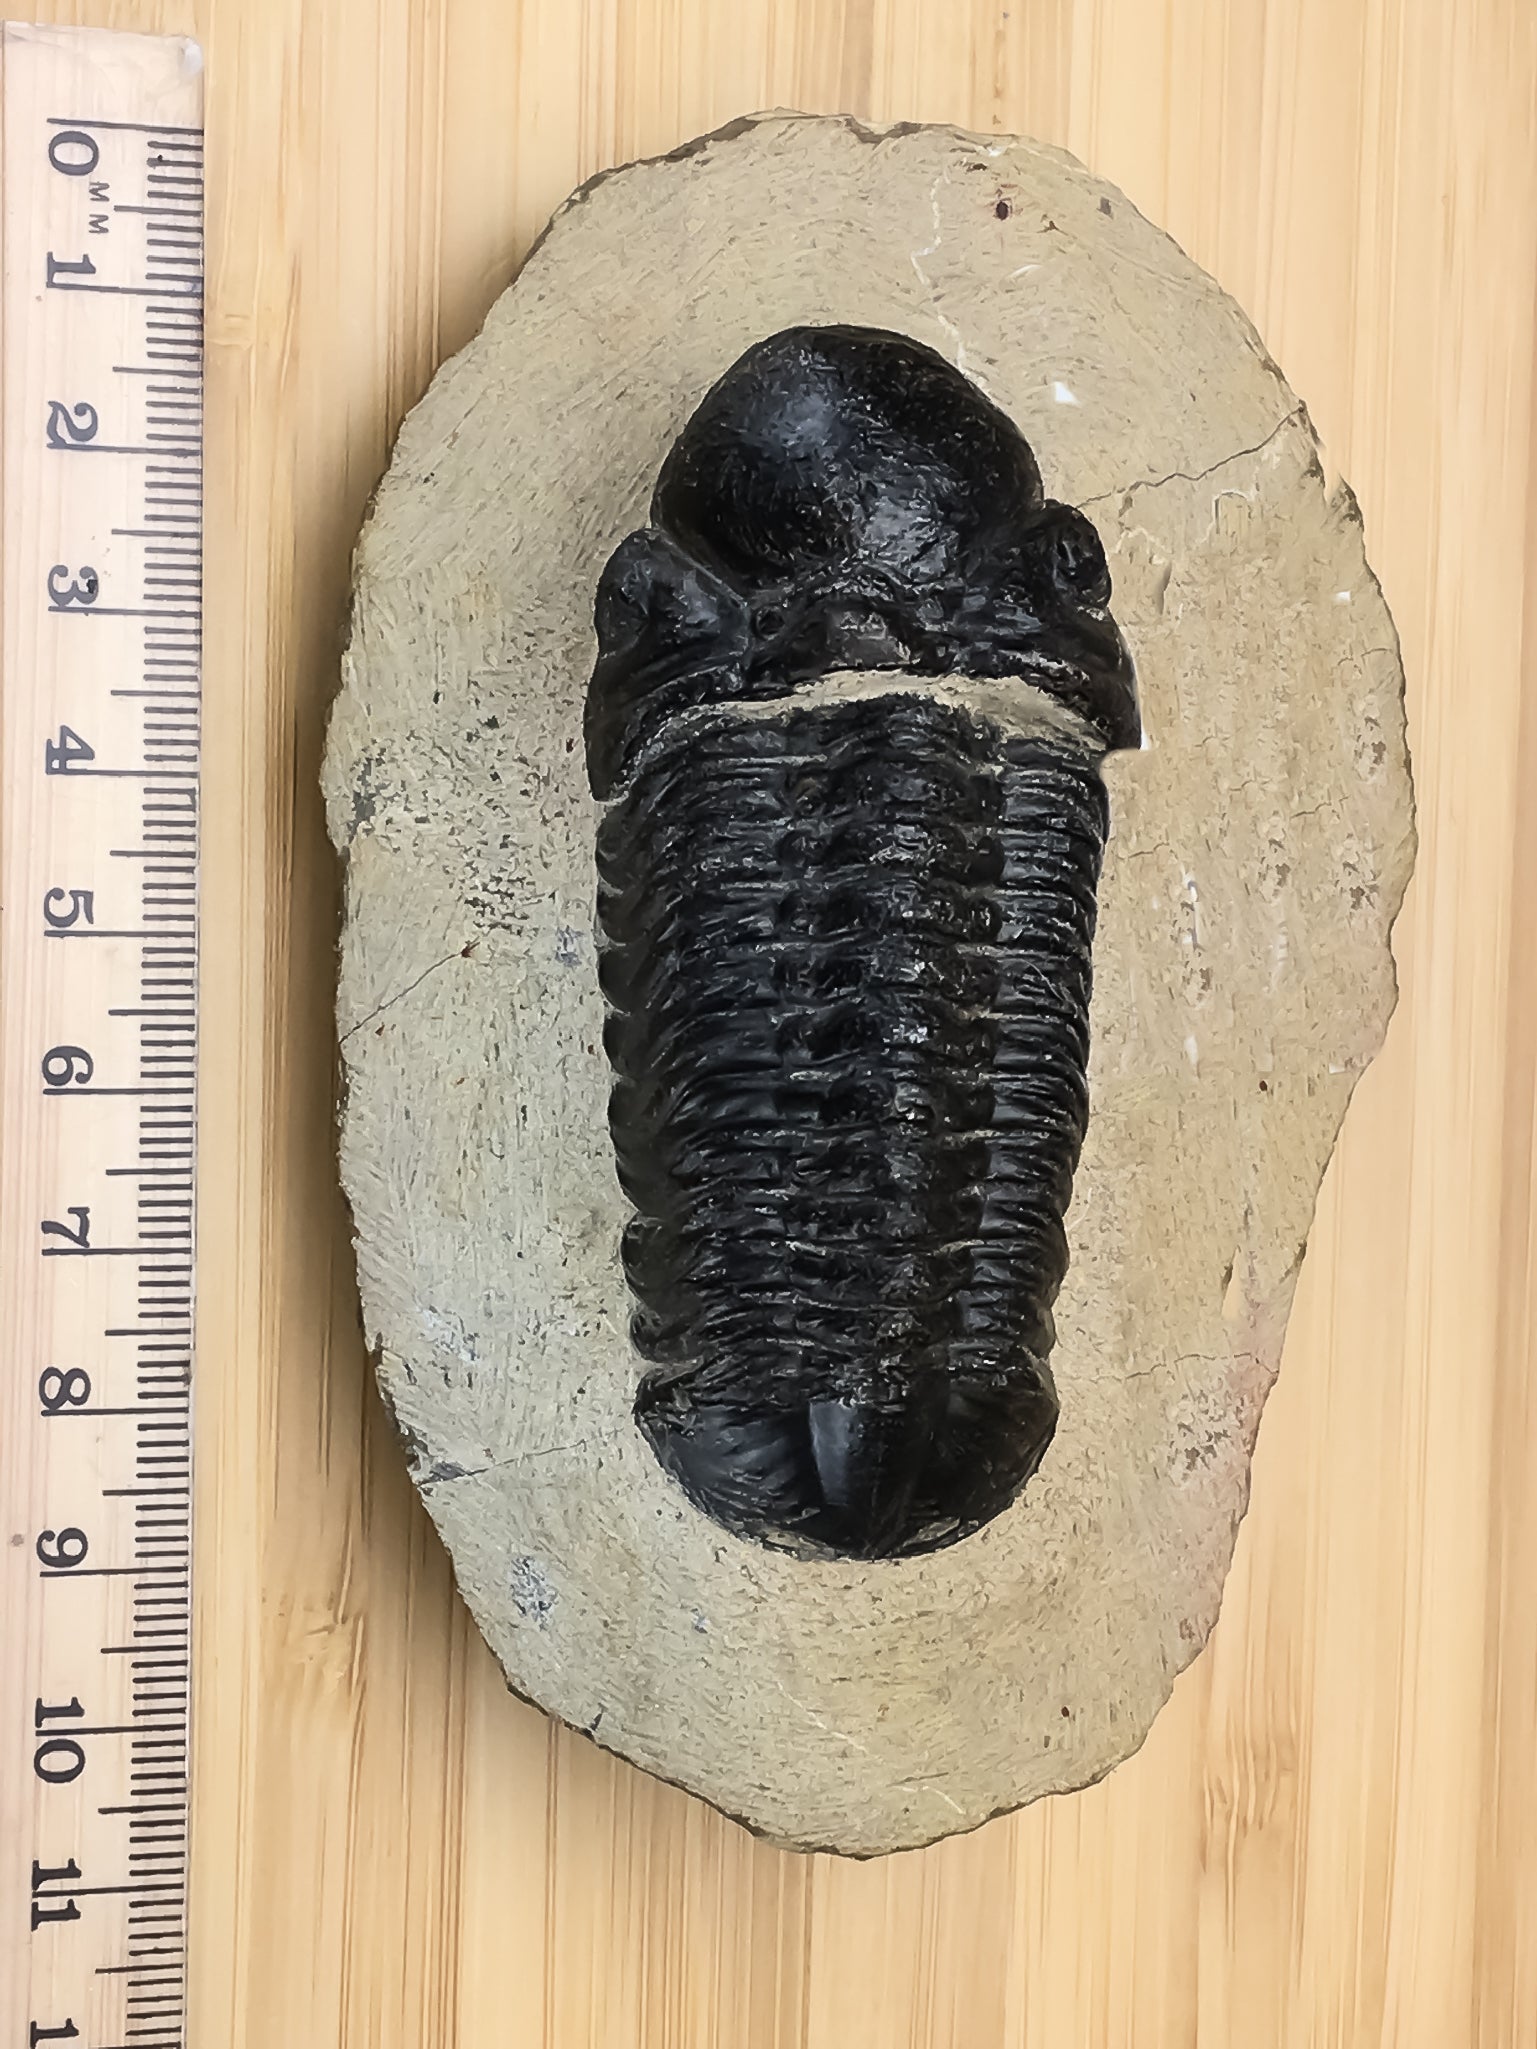 Reedops trilobite fossil next to a ruler. It i12cm kong and approximately 6 cm wide